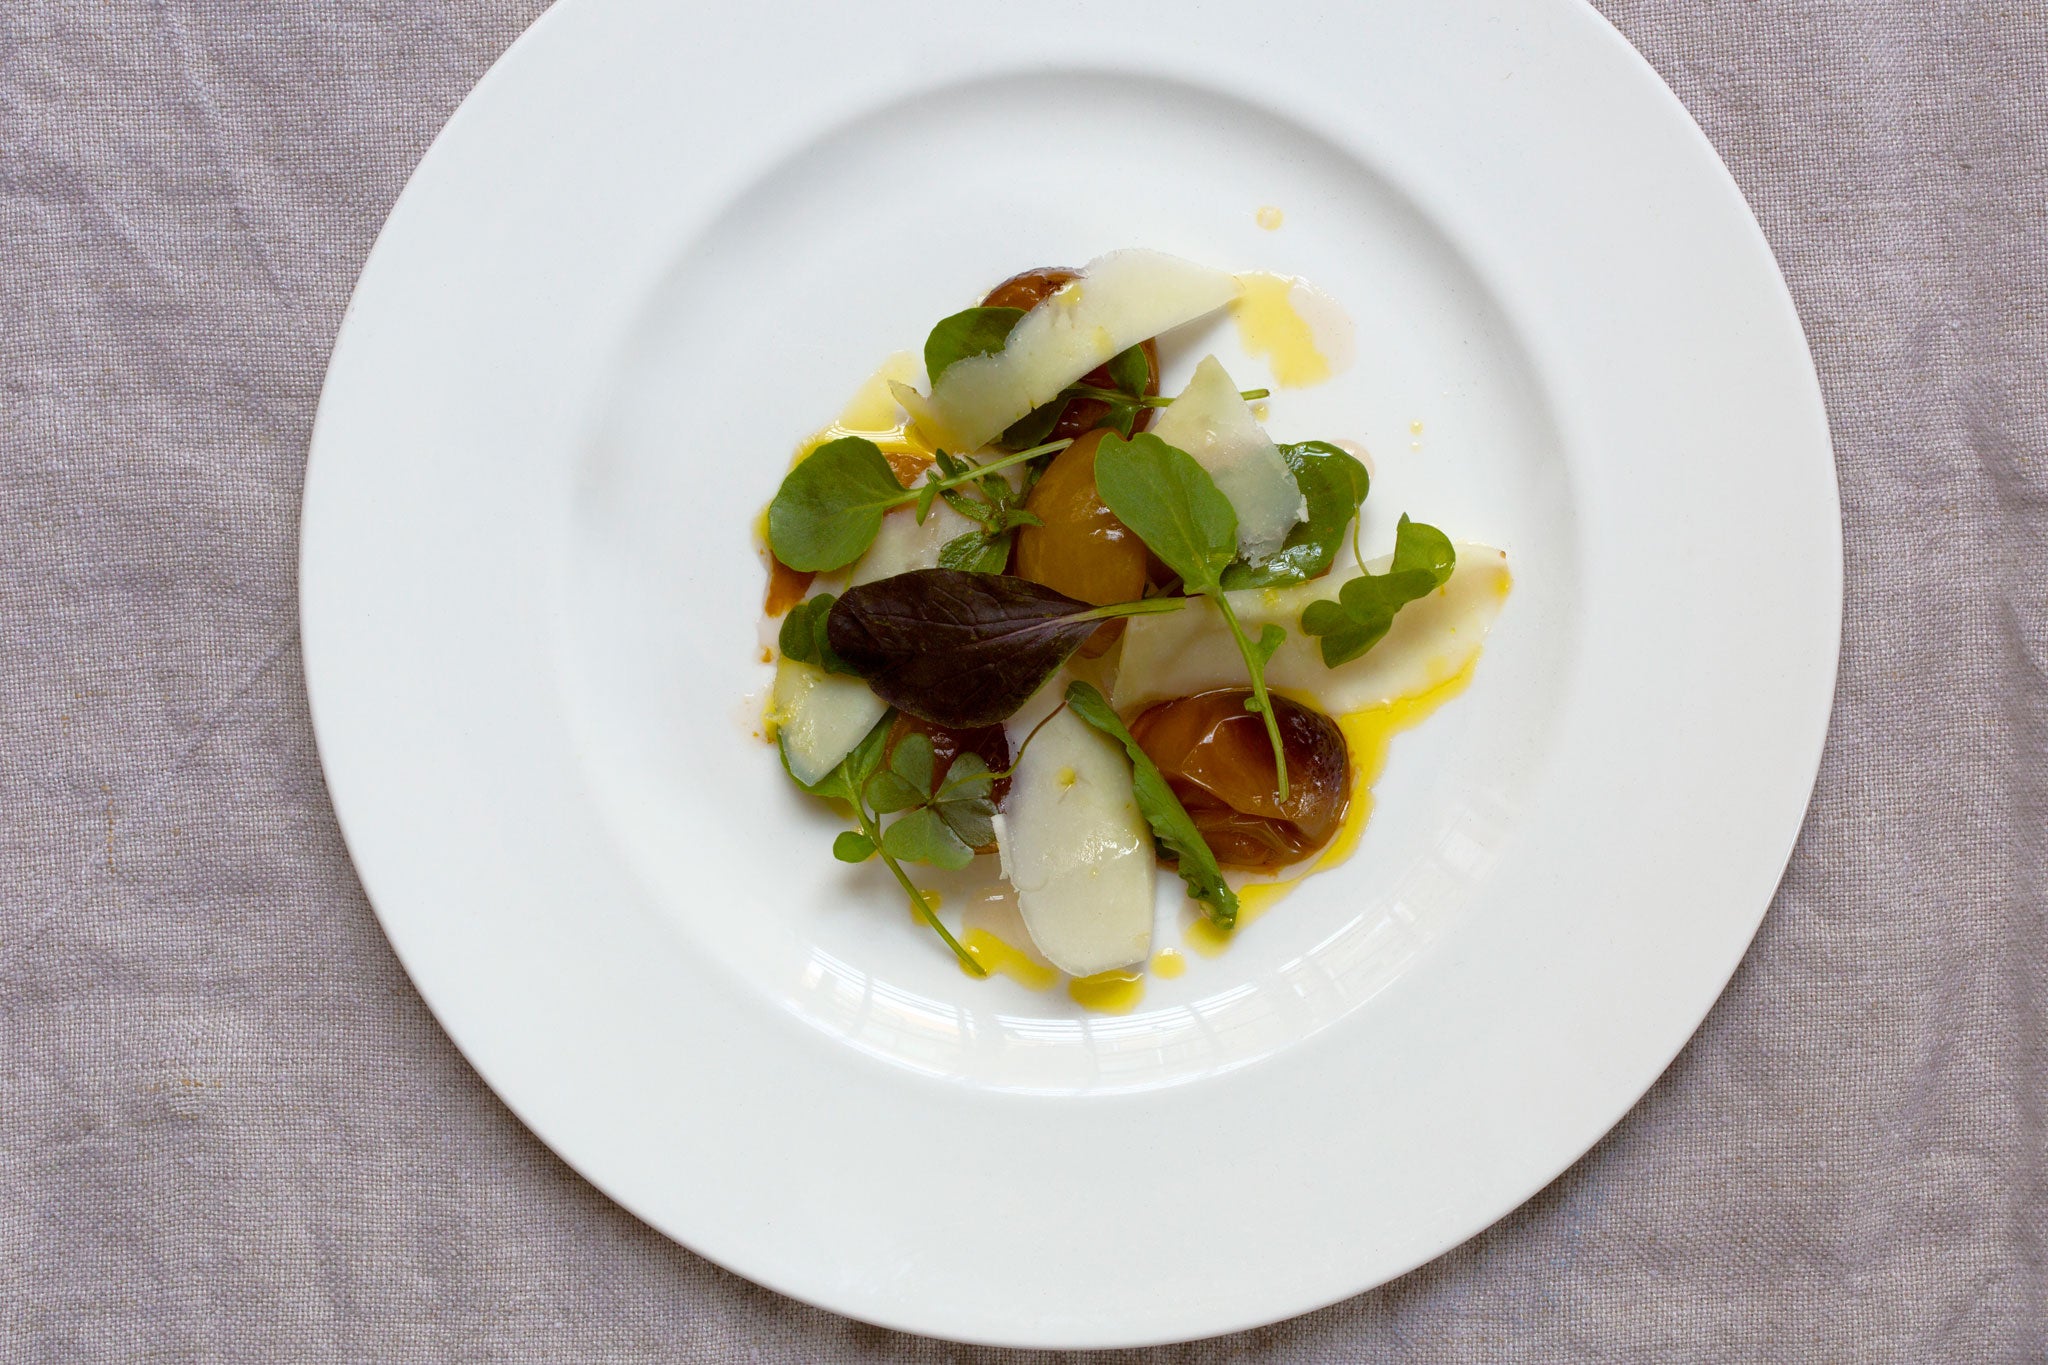 Pickled Greengage and goat's cheese salad